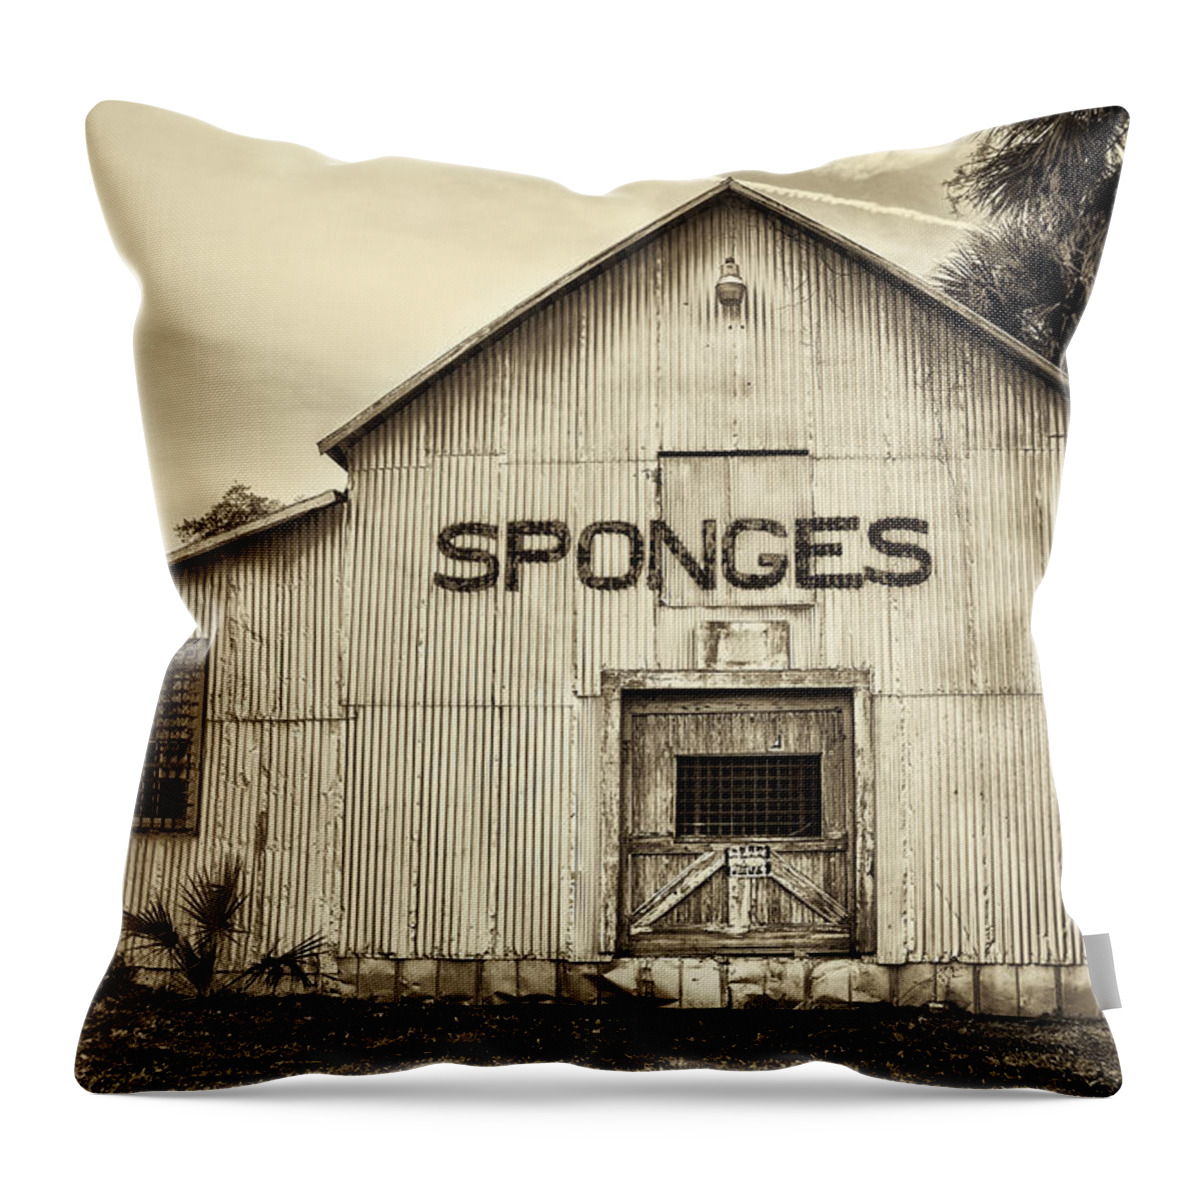 Tarpon Throw Pillow featuring the photograph Tarpon Springs Sponges by Bill Cannon